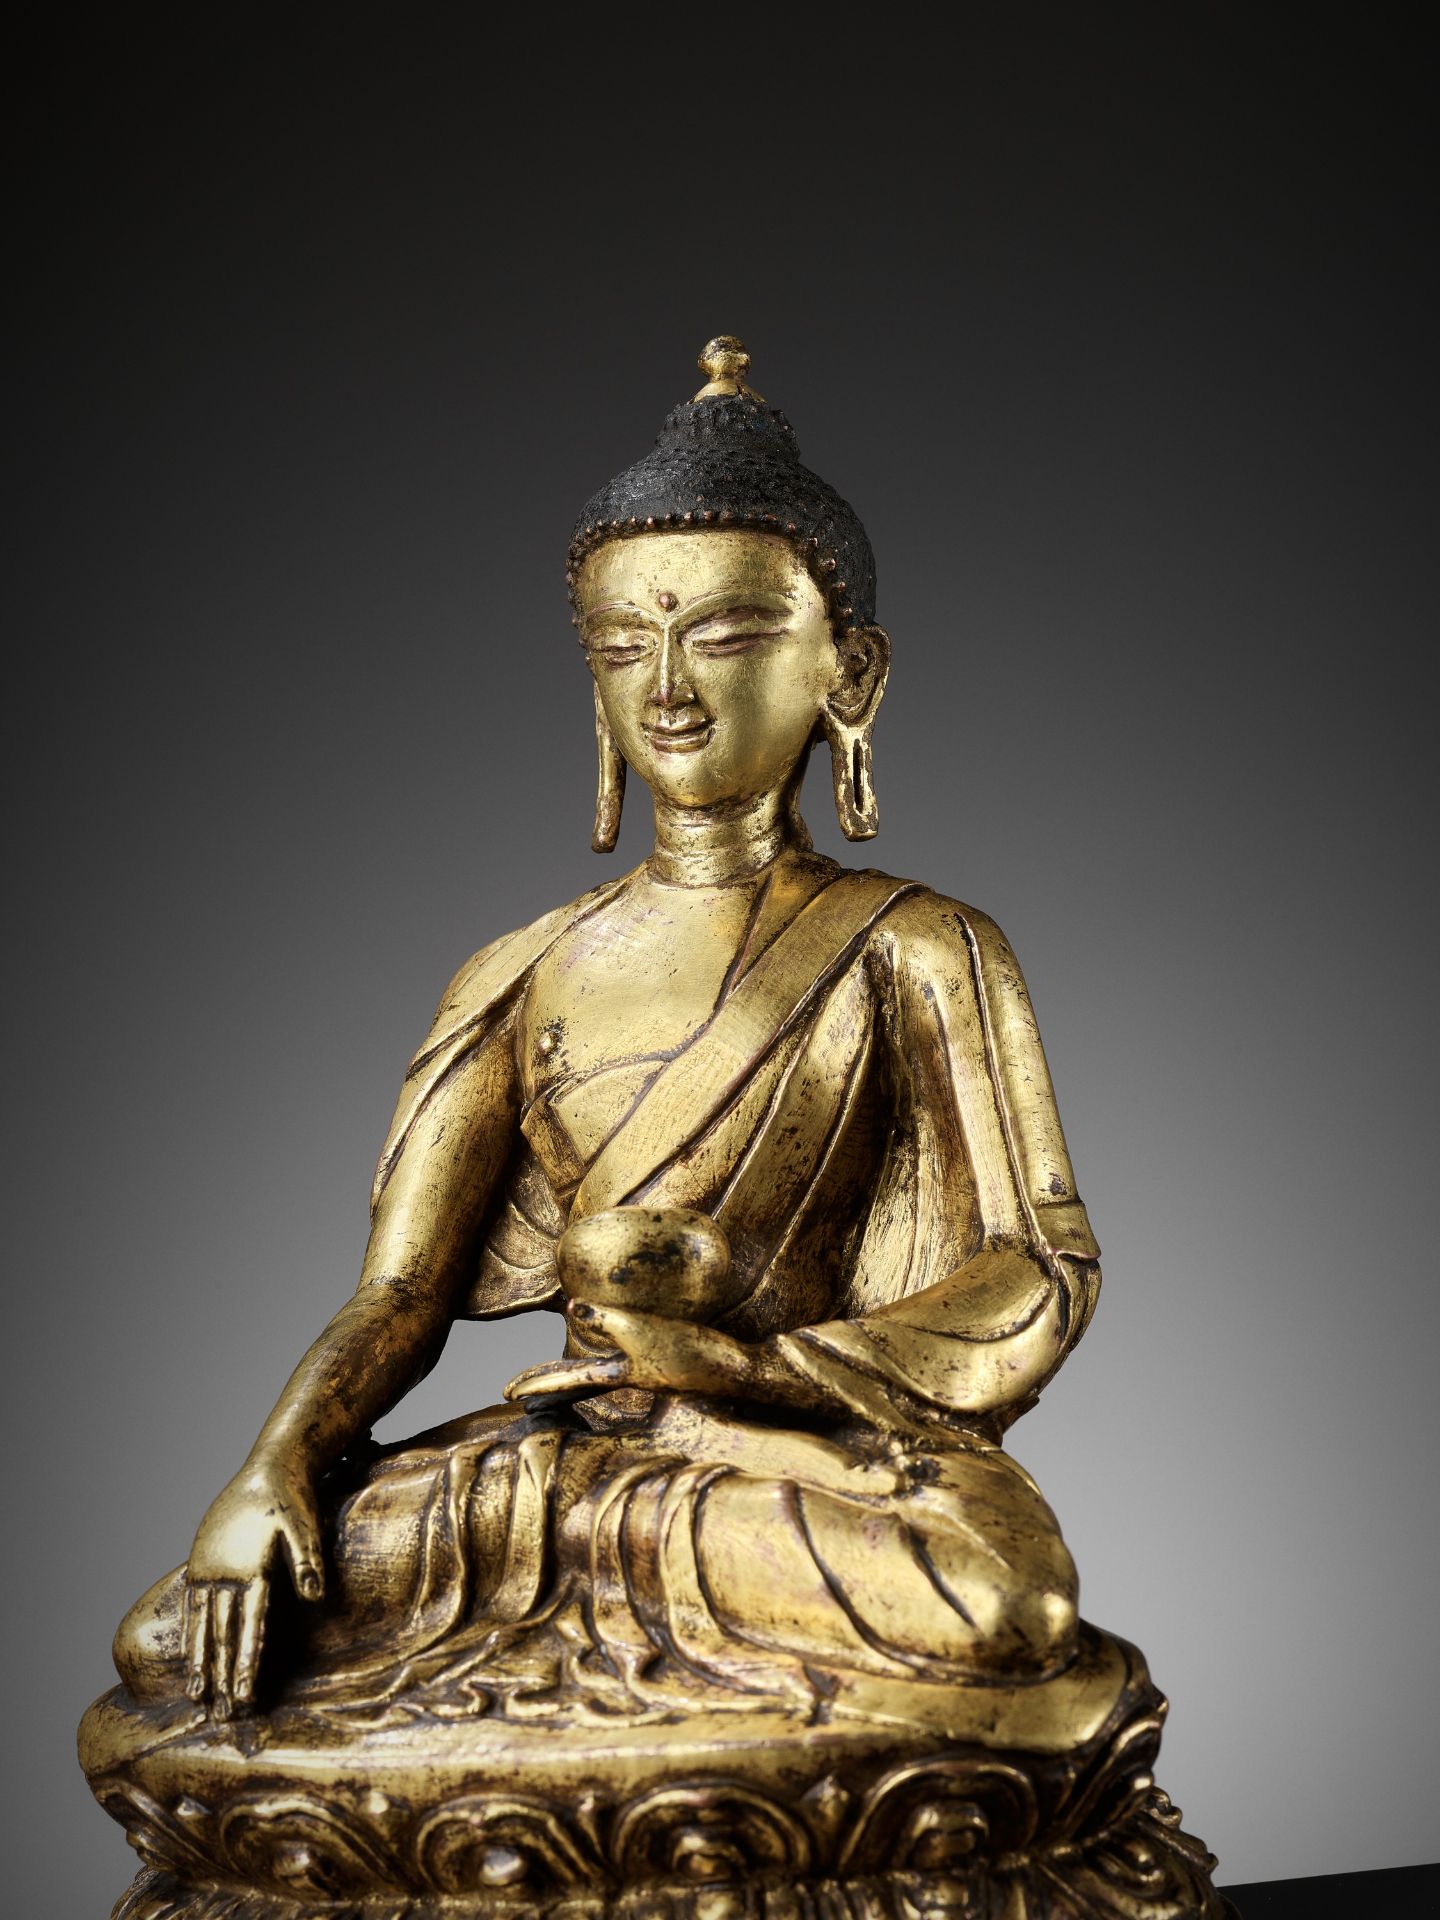 A GILT COPPER ALLOY FIGURE OF BUDDHA, 11TH-12TH CENTURY - Image 16 of 17